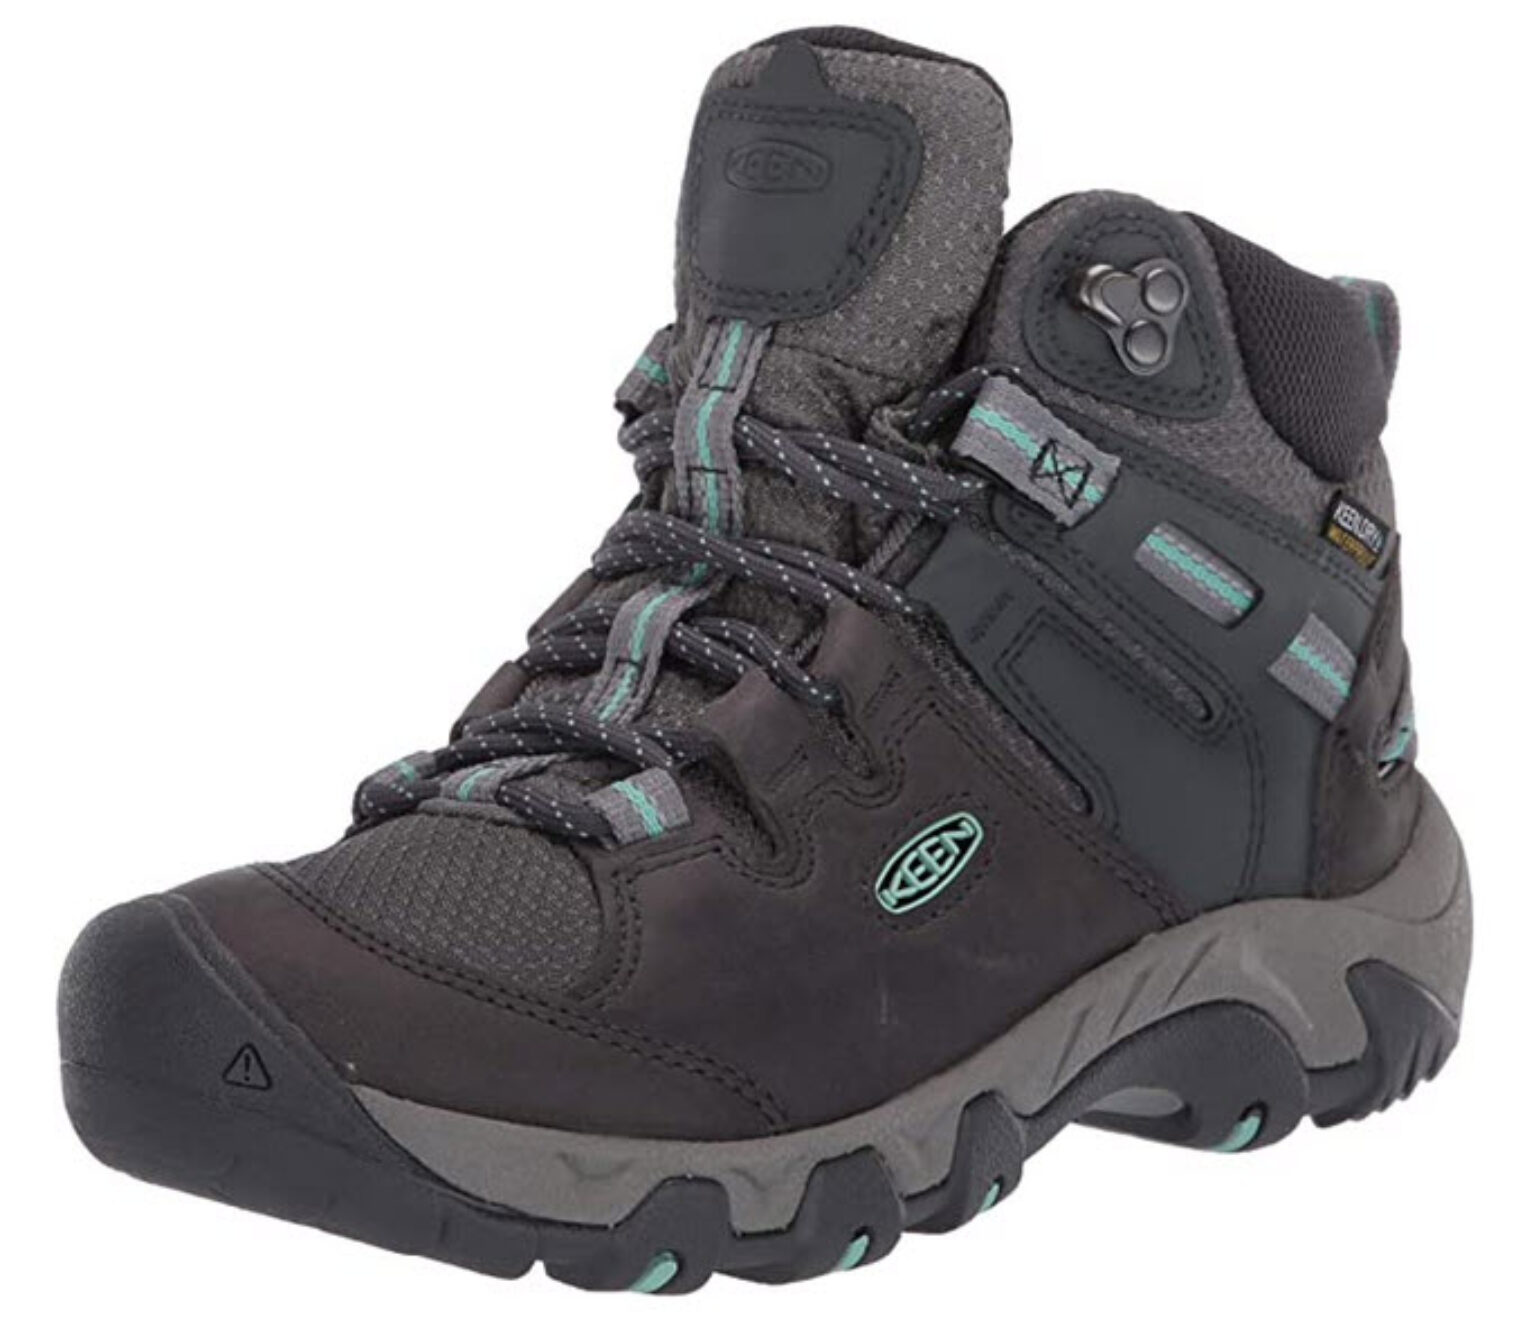 KEEN Women's Steens Mid WP Hiking Boot Review - Hiking Lady Boots